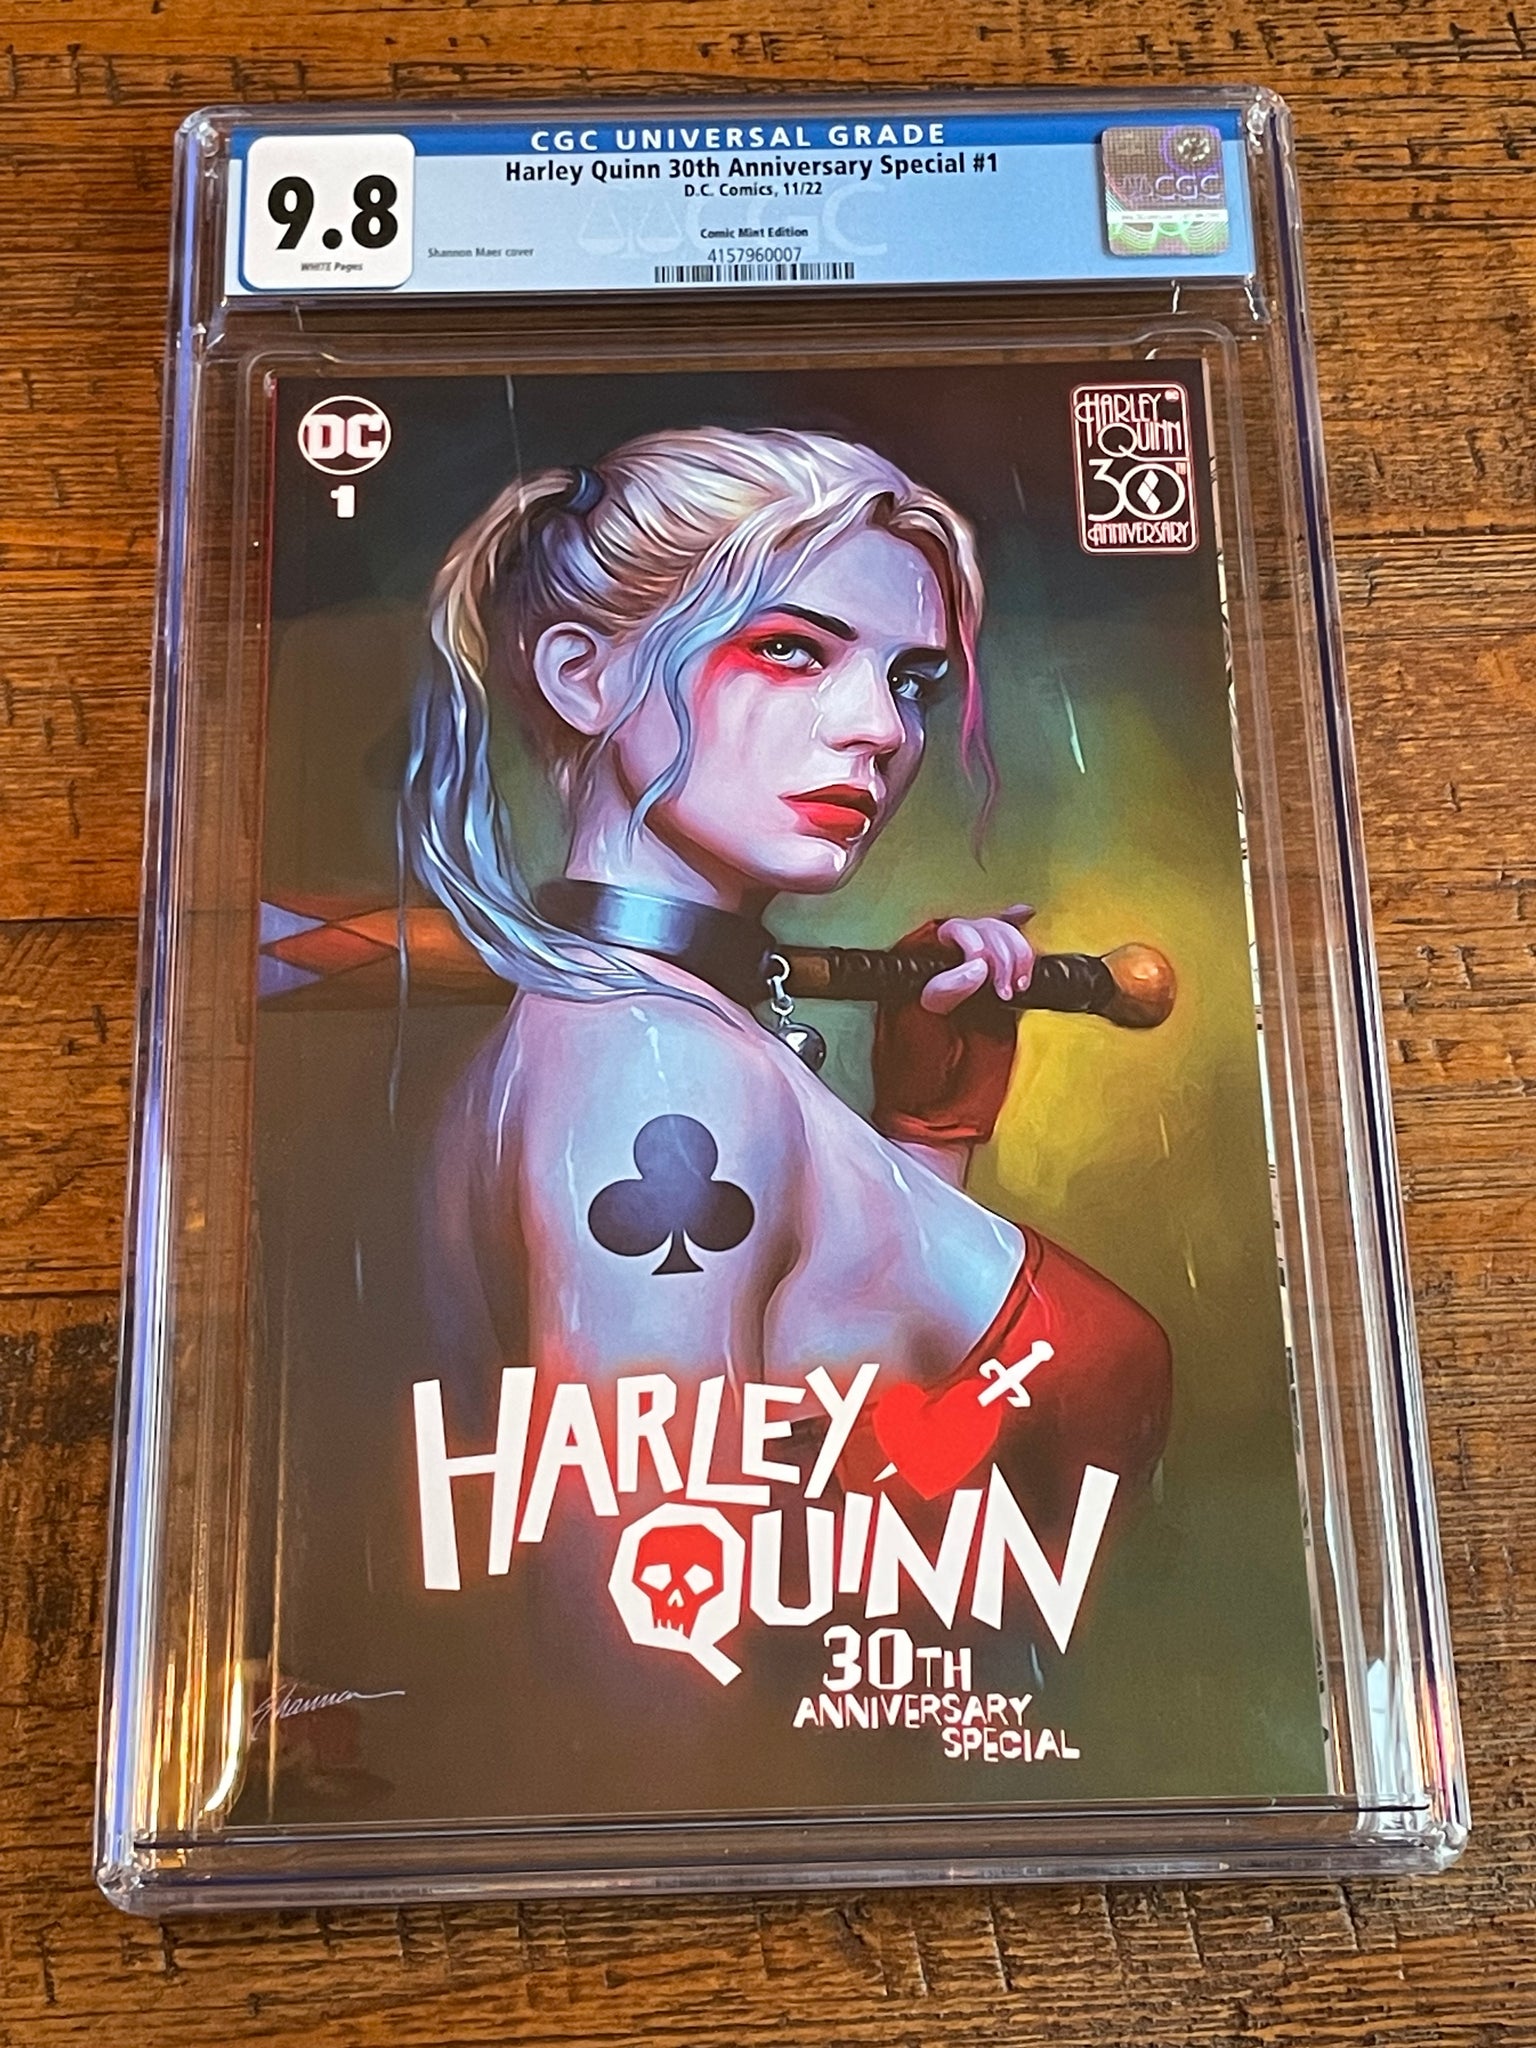 HARLEY QUINN 30th ANNIVERSARY #1 CGC 9.8 SHANNON MAER LIMITED TO 1000 EXCL VARIANT BATMAN